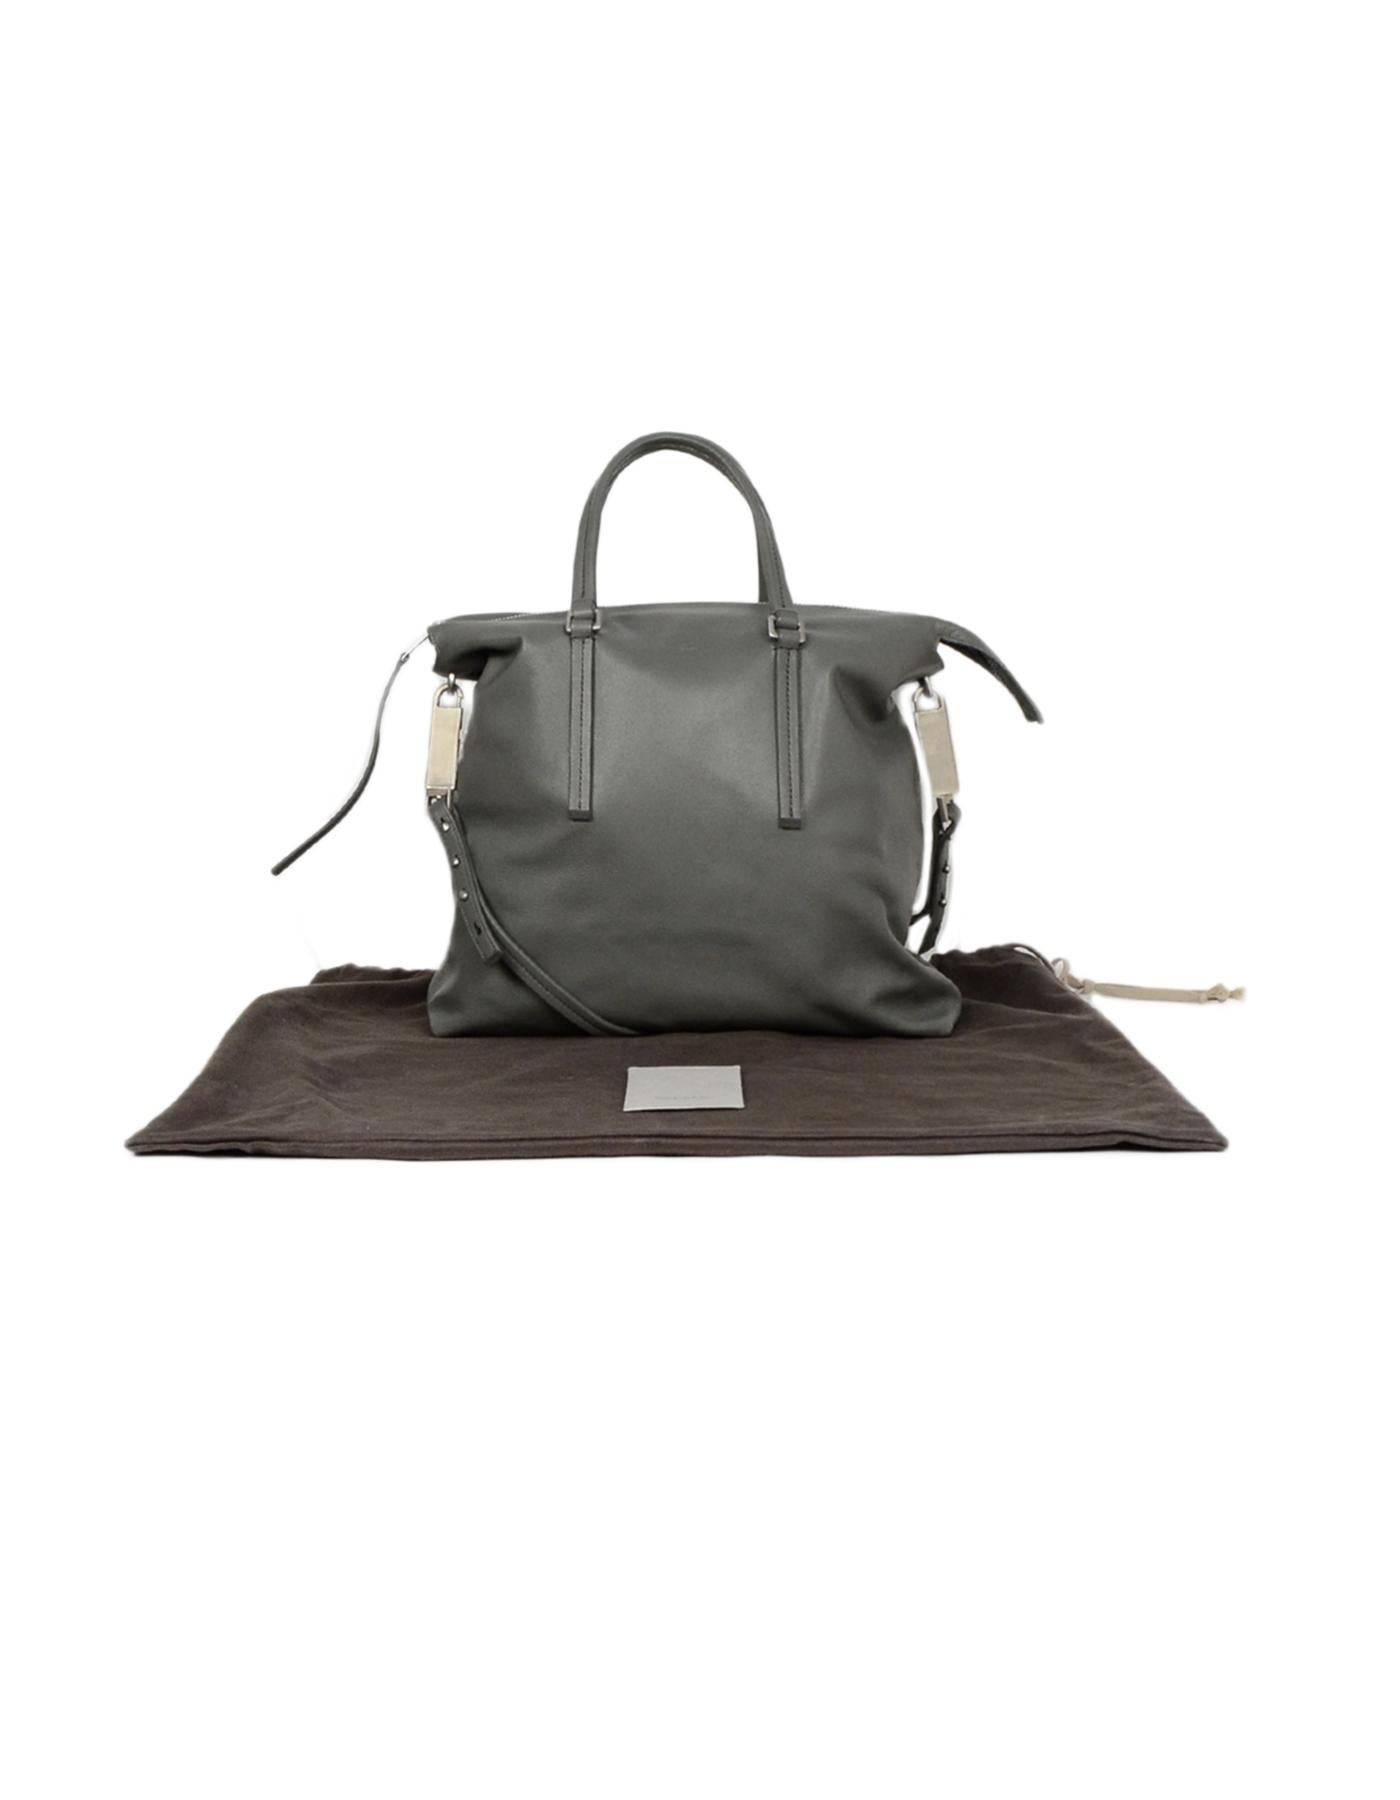 Rick Owens Walrus Grey Leather Tote Bag rt $1, 495 4